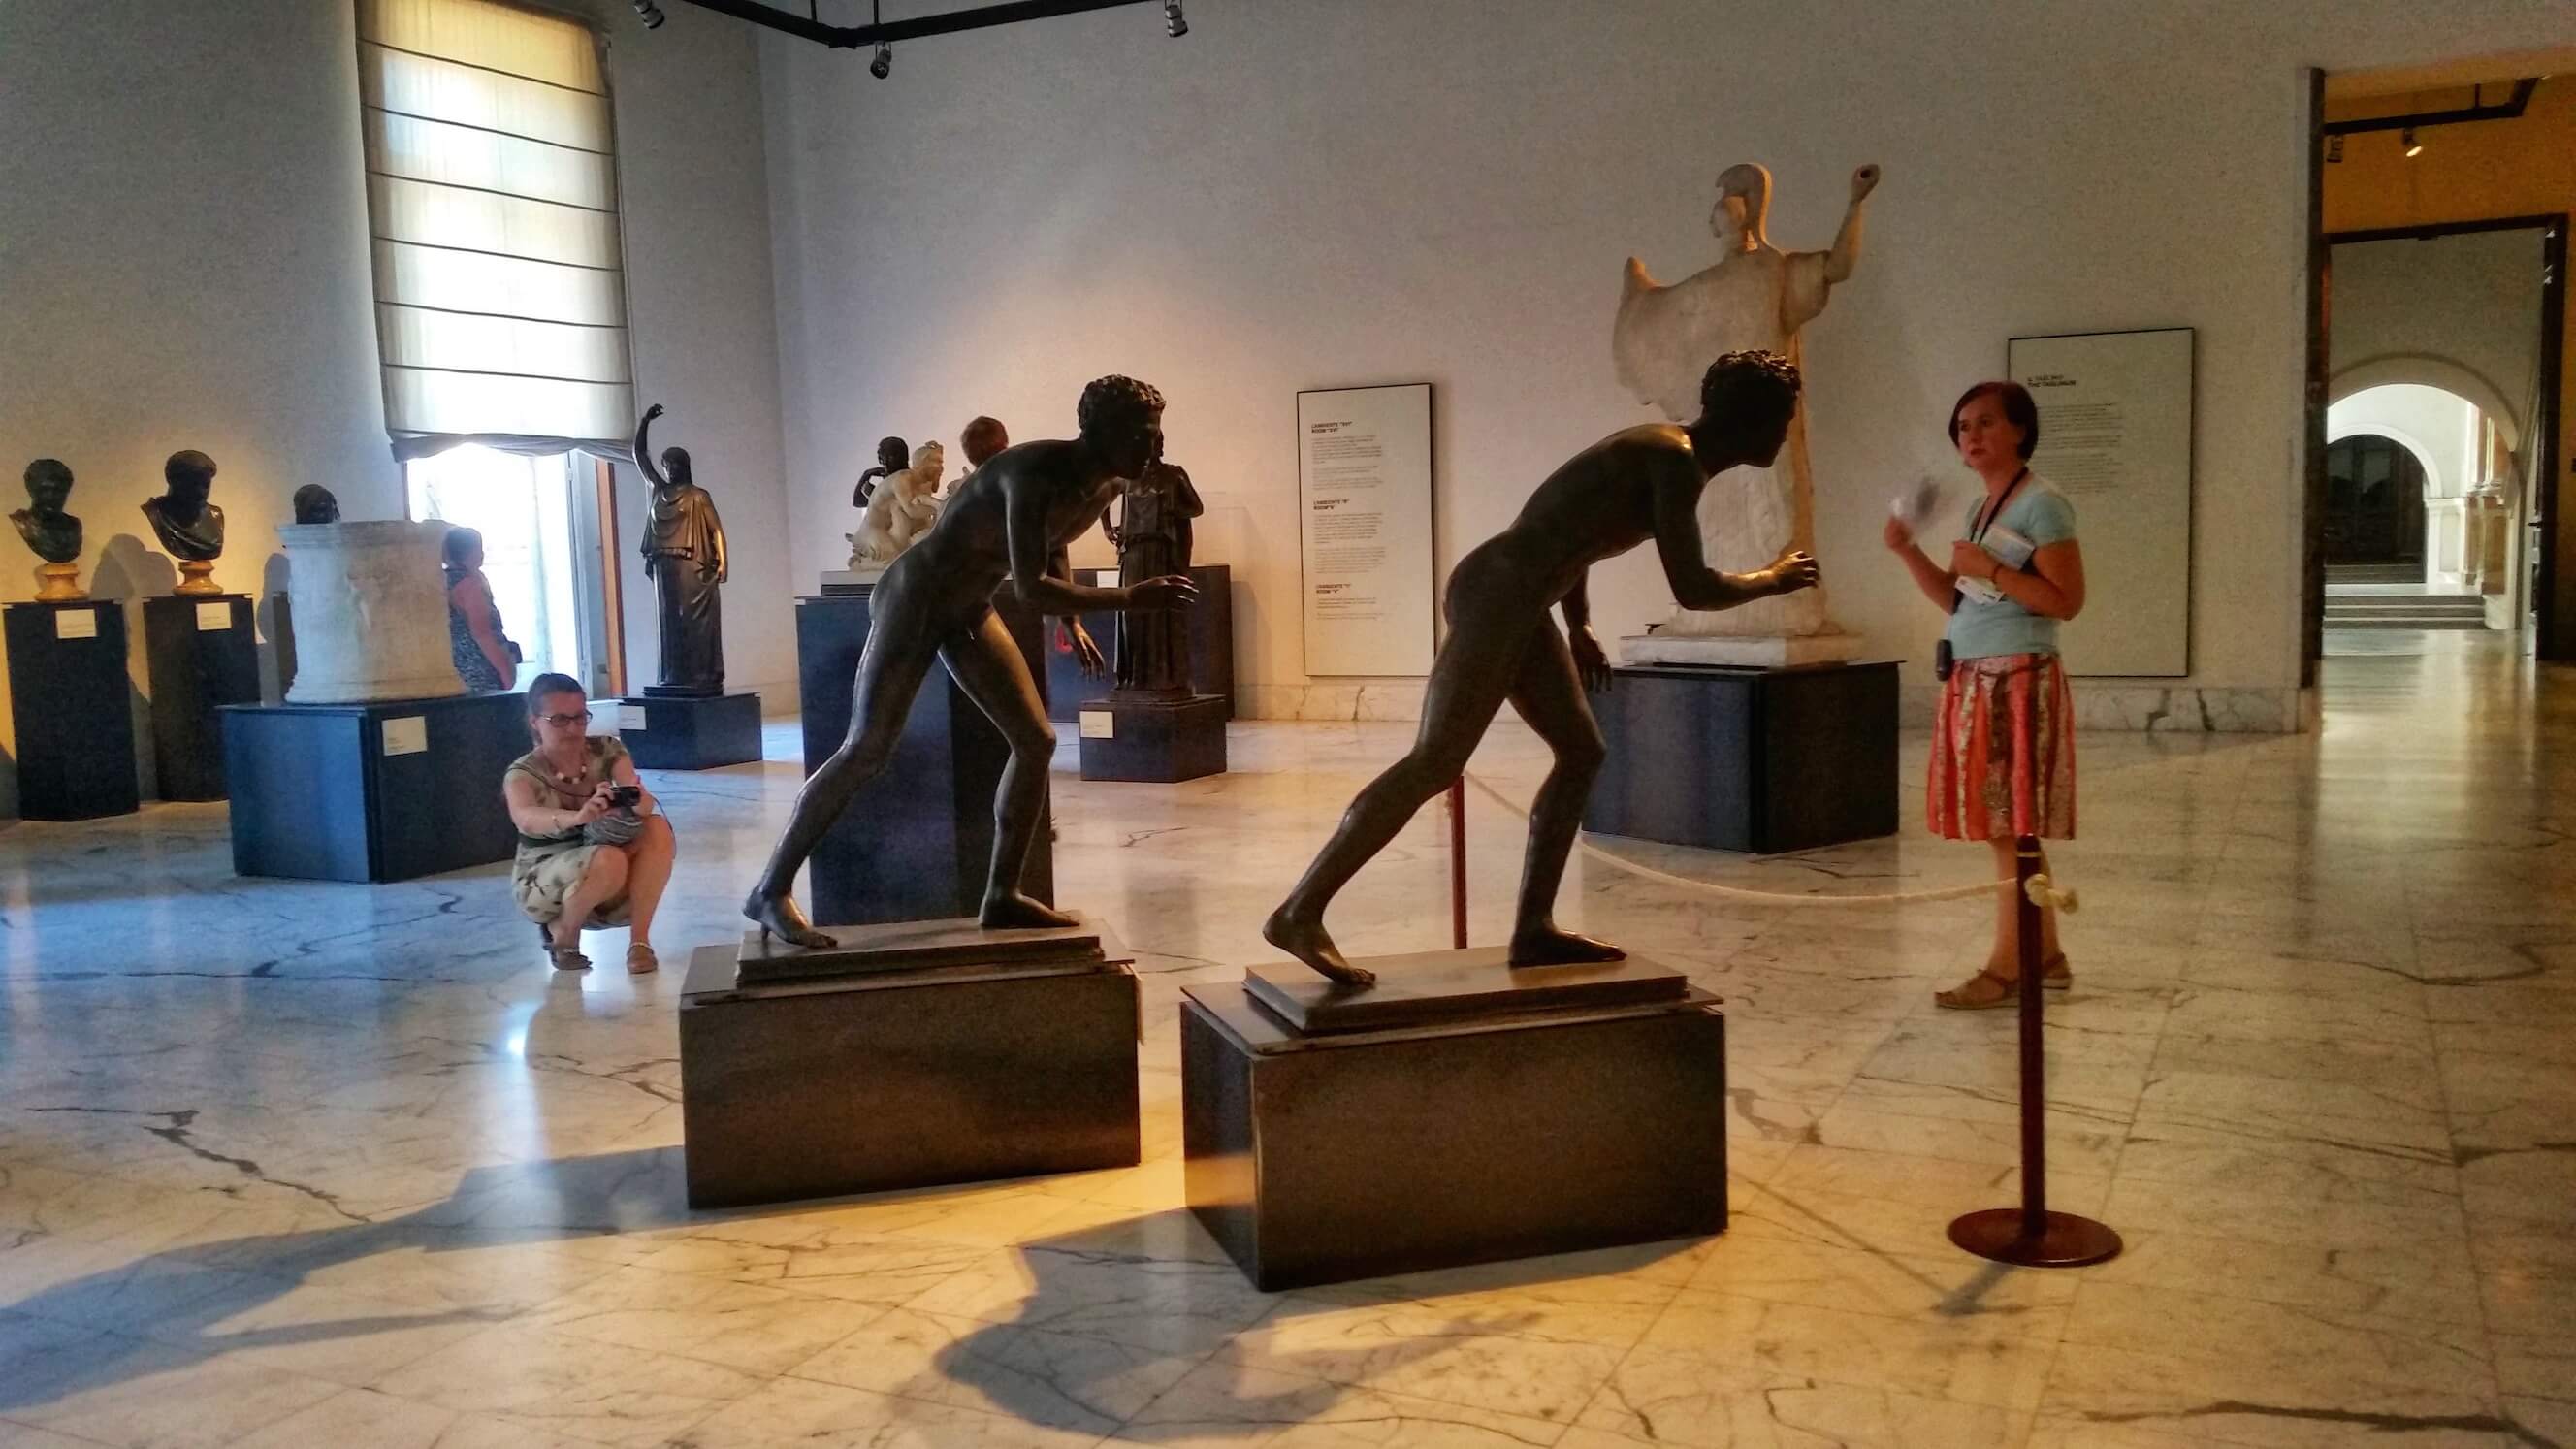 7 Masterpieces from the Naples Archaeological Museum You Need to pic